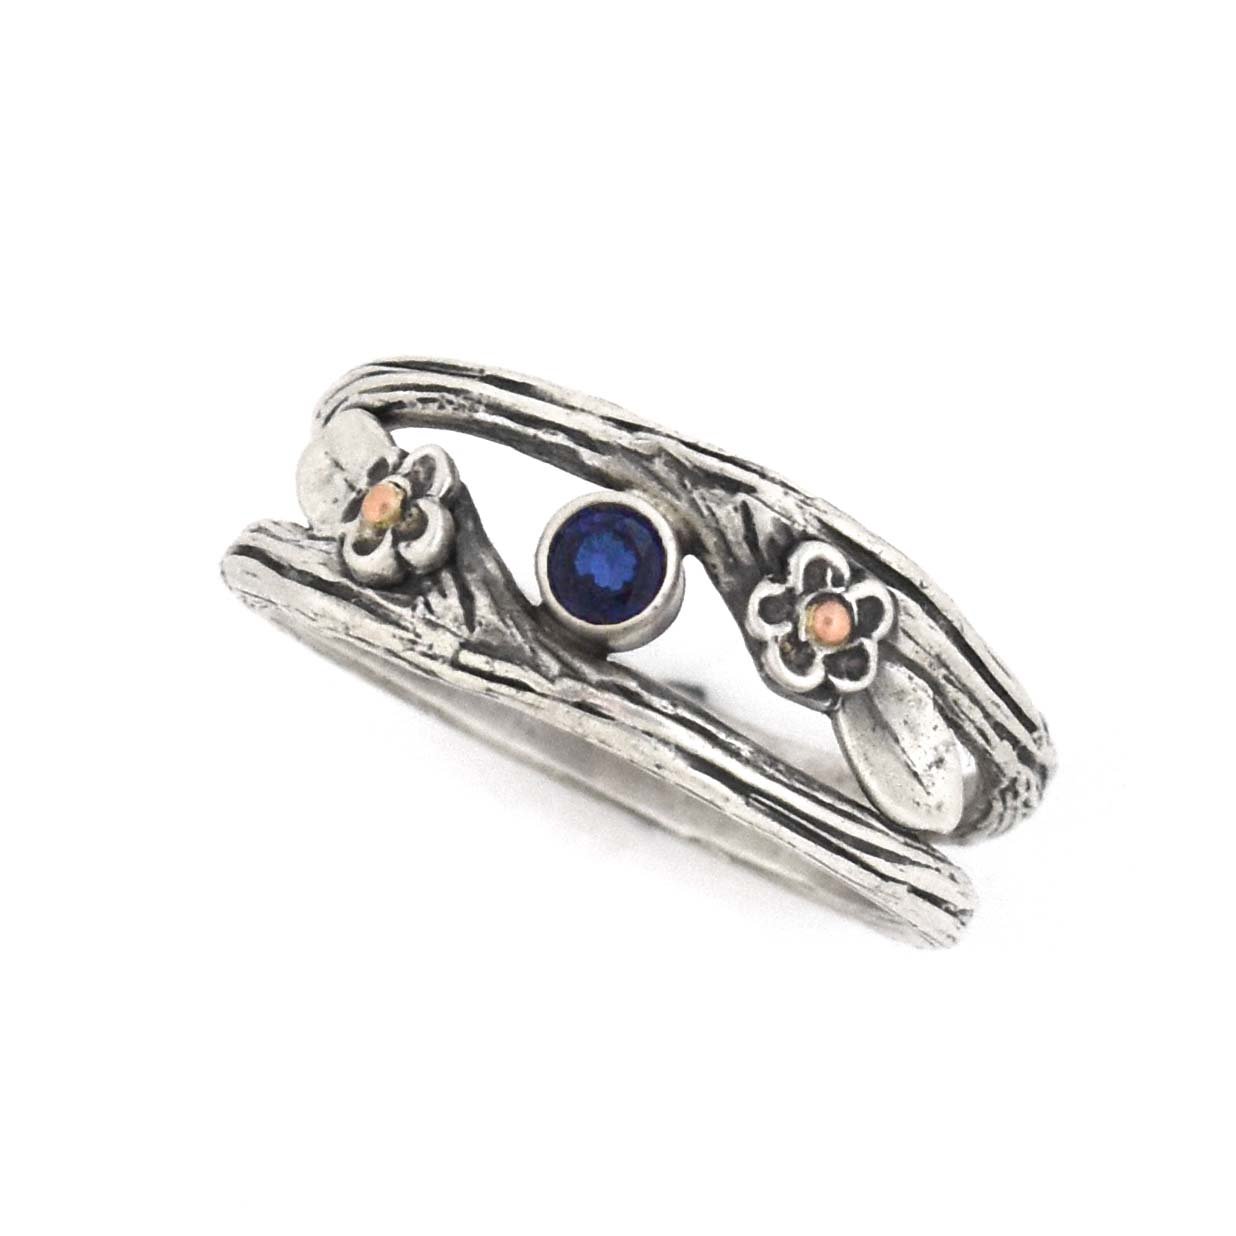 Blossoming Romance Twig Ring - your choice of stone - Wedding Ring Recycled Diamond Blue Sapphire 2680 - handmade by Beth Millner Jewelry